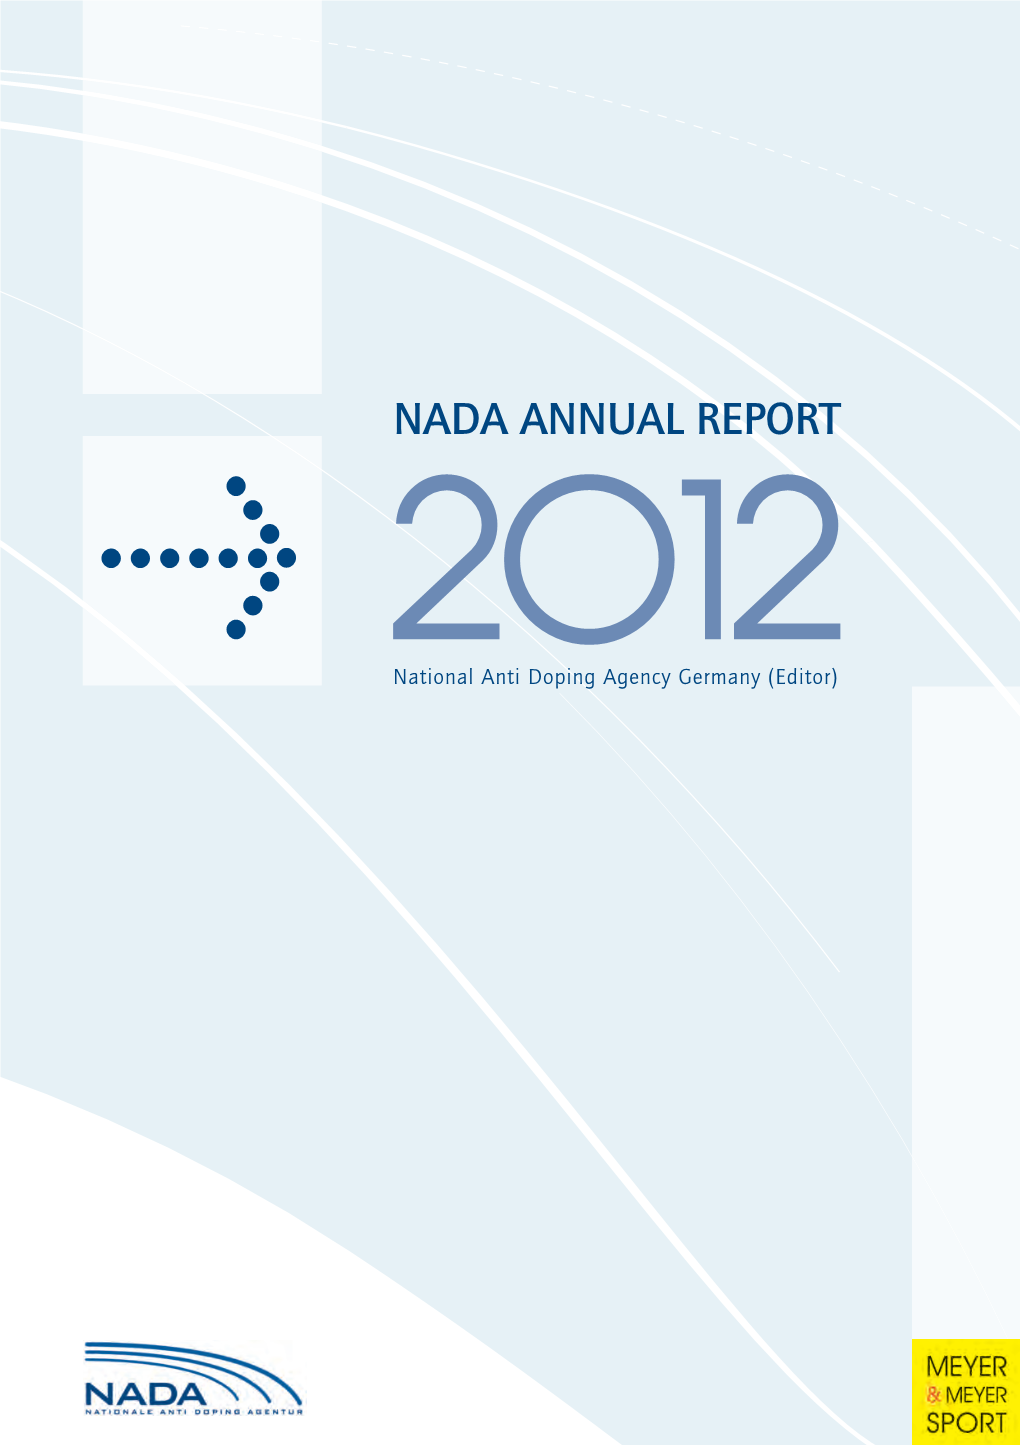 NADA ANNUAL REPORT Together with Our Partners – for Clean and Fair Sports